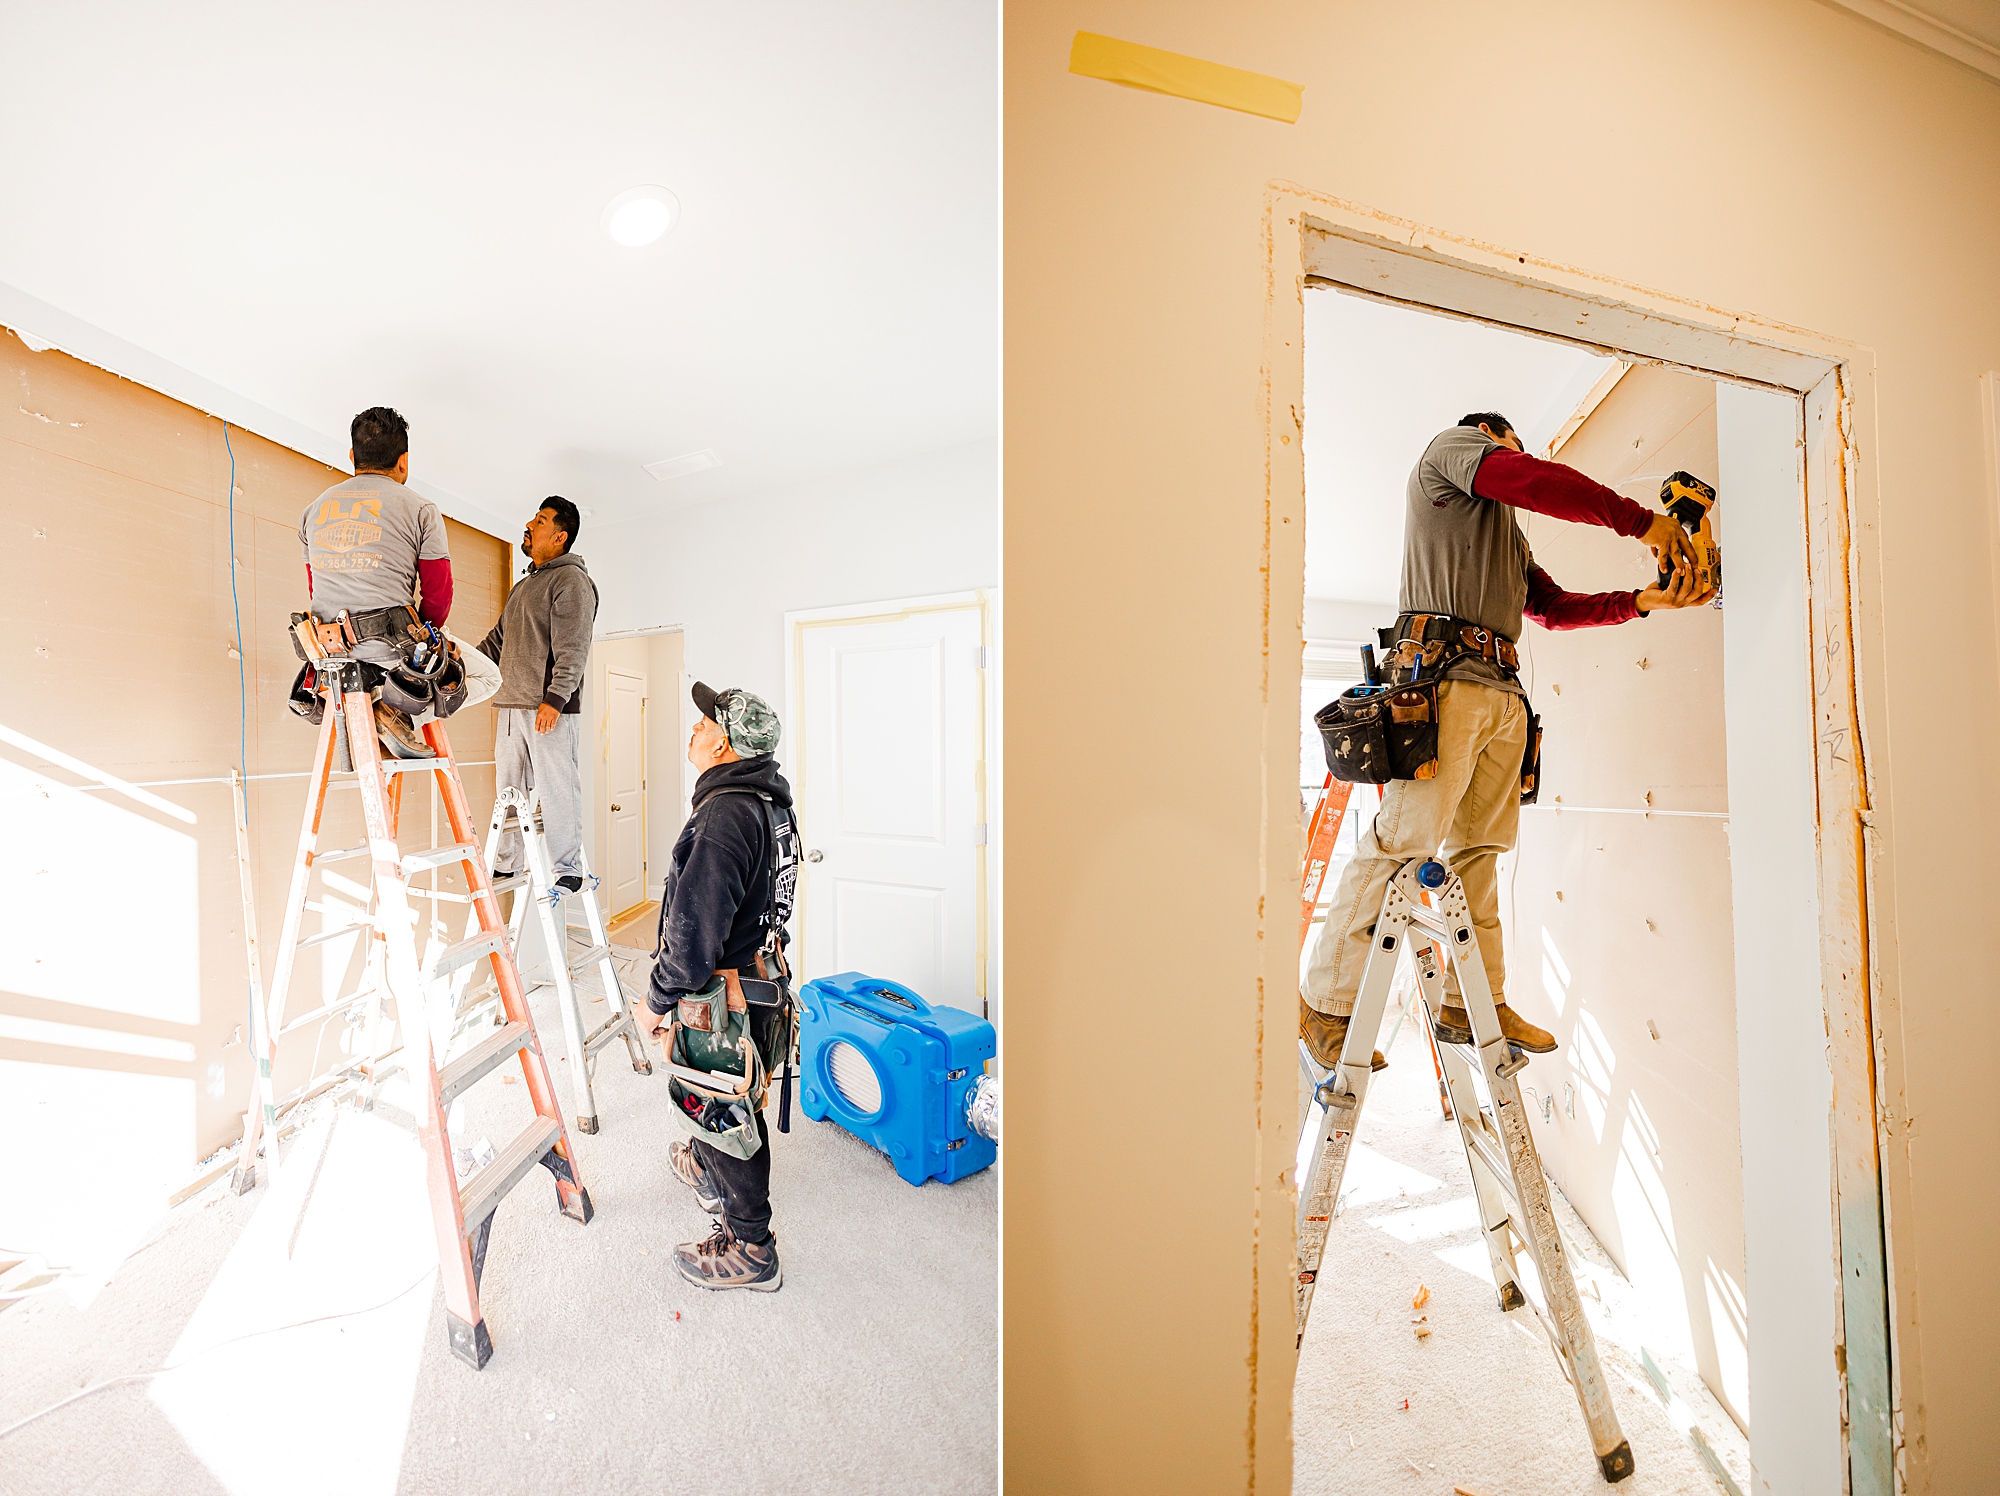 Turn Key Solutions puts up drywall during renovations